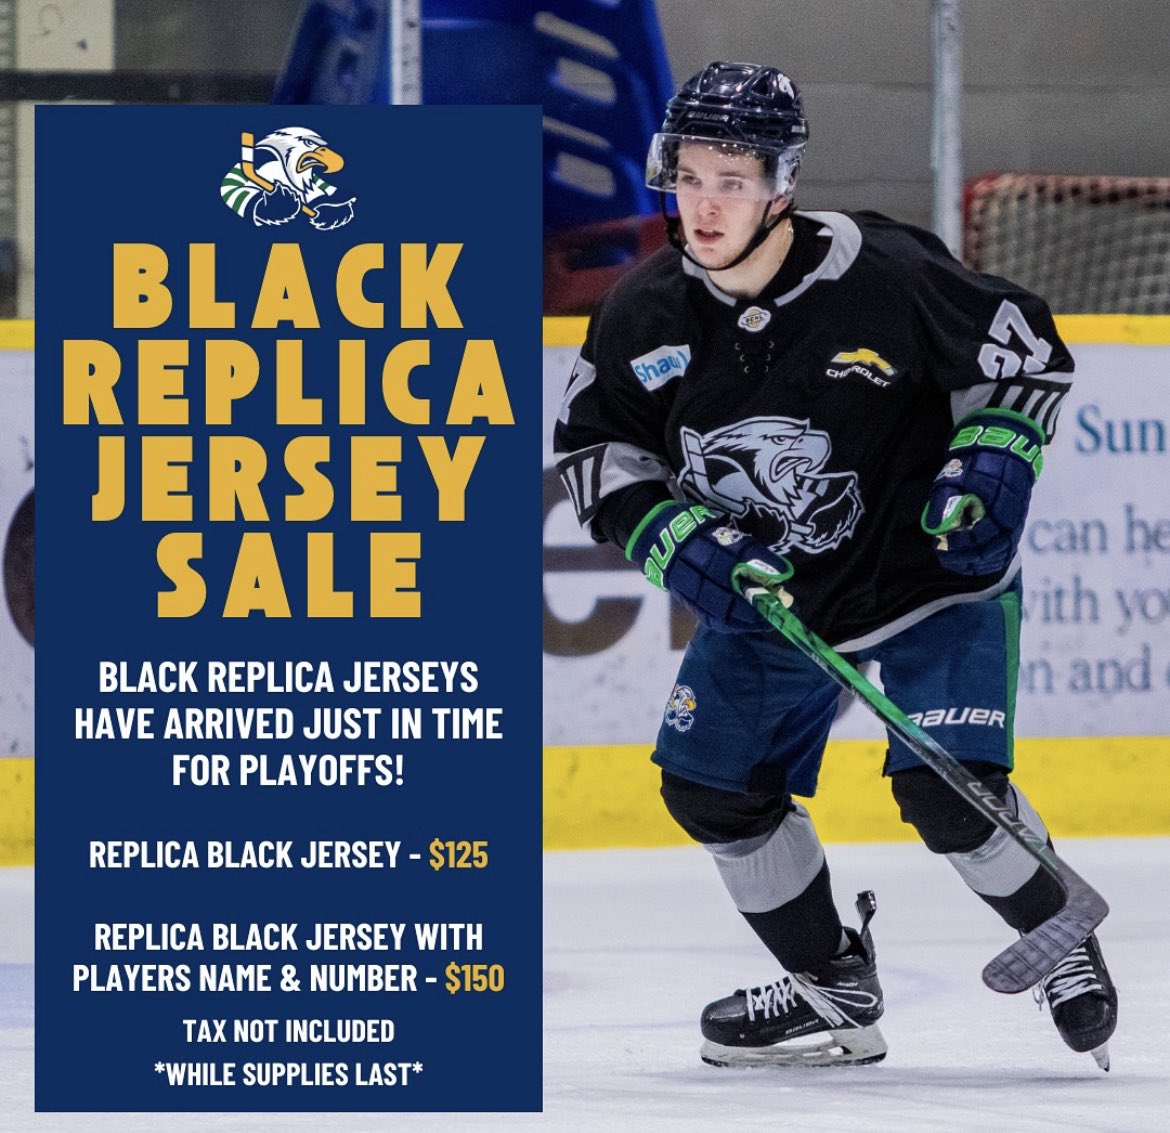 Black replica jerseys are here for playoffs! 🦅 Make sure to stop by the merch booth on Saturday night to get yours! #SoarWithUs | #Surrey | #BCHL